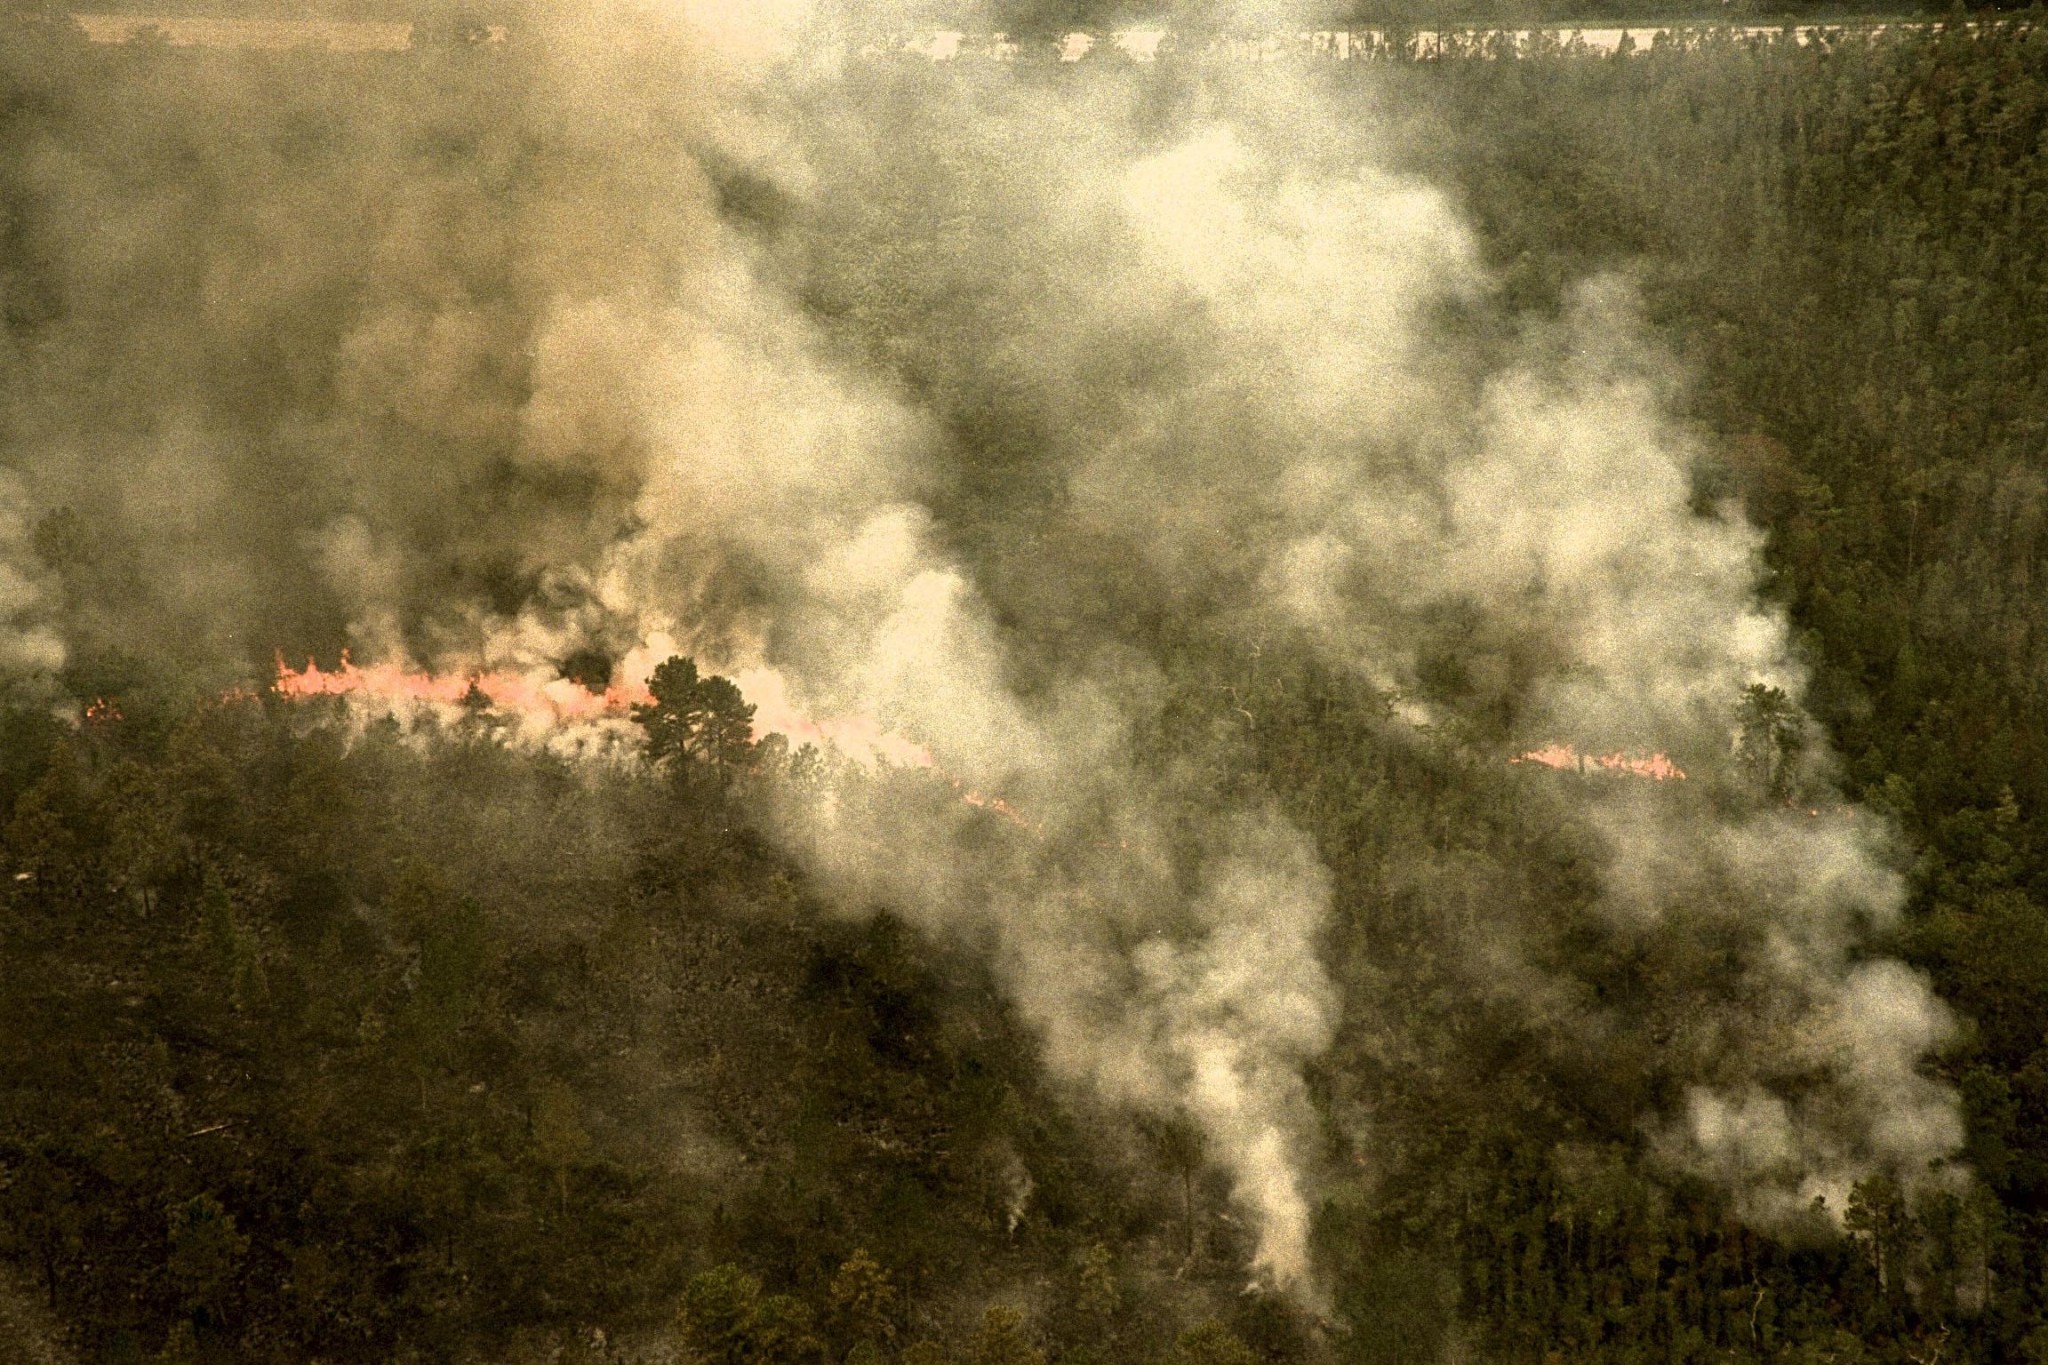 Aerial view of the 1998 Fire with billowing smoke